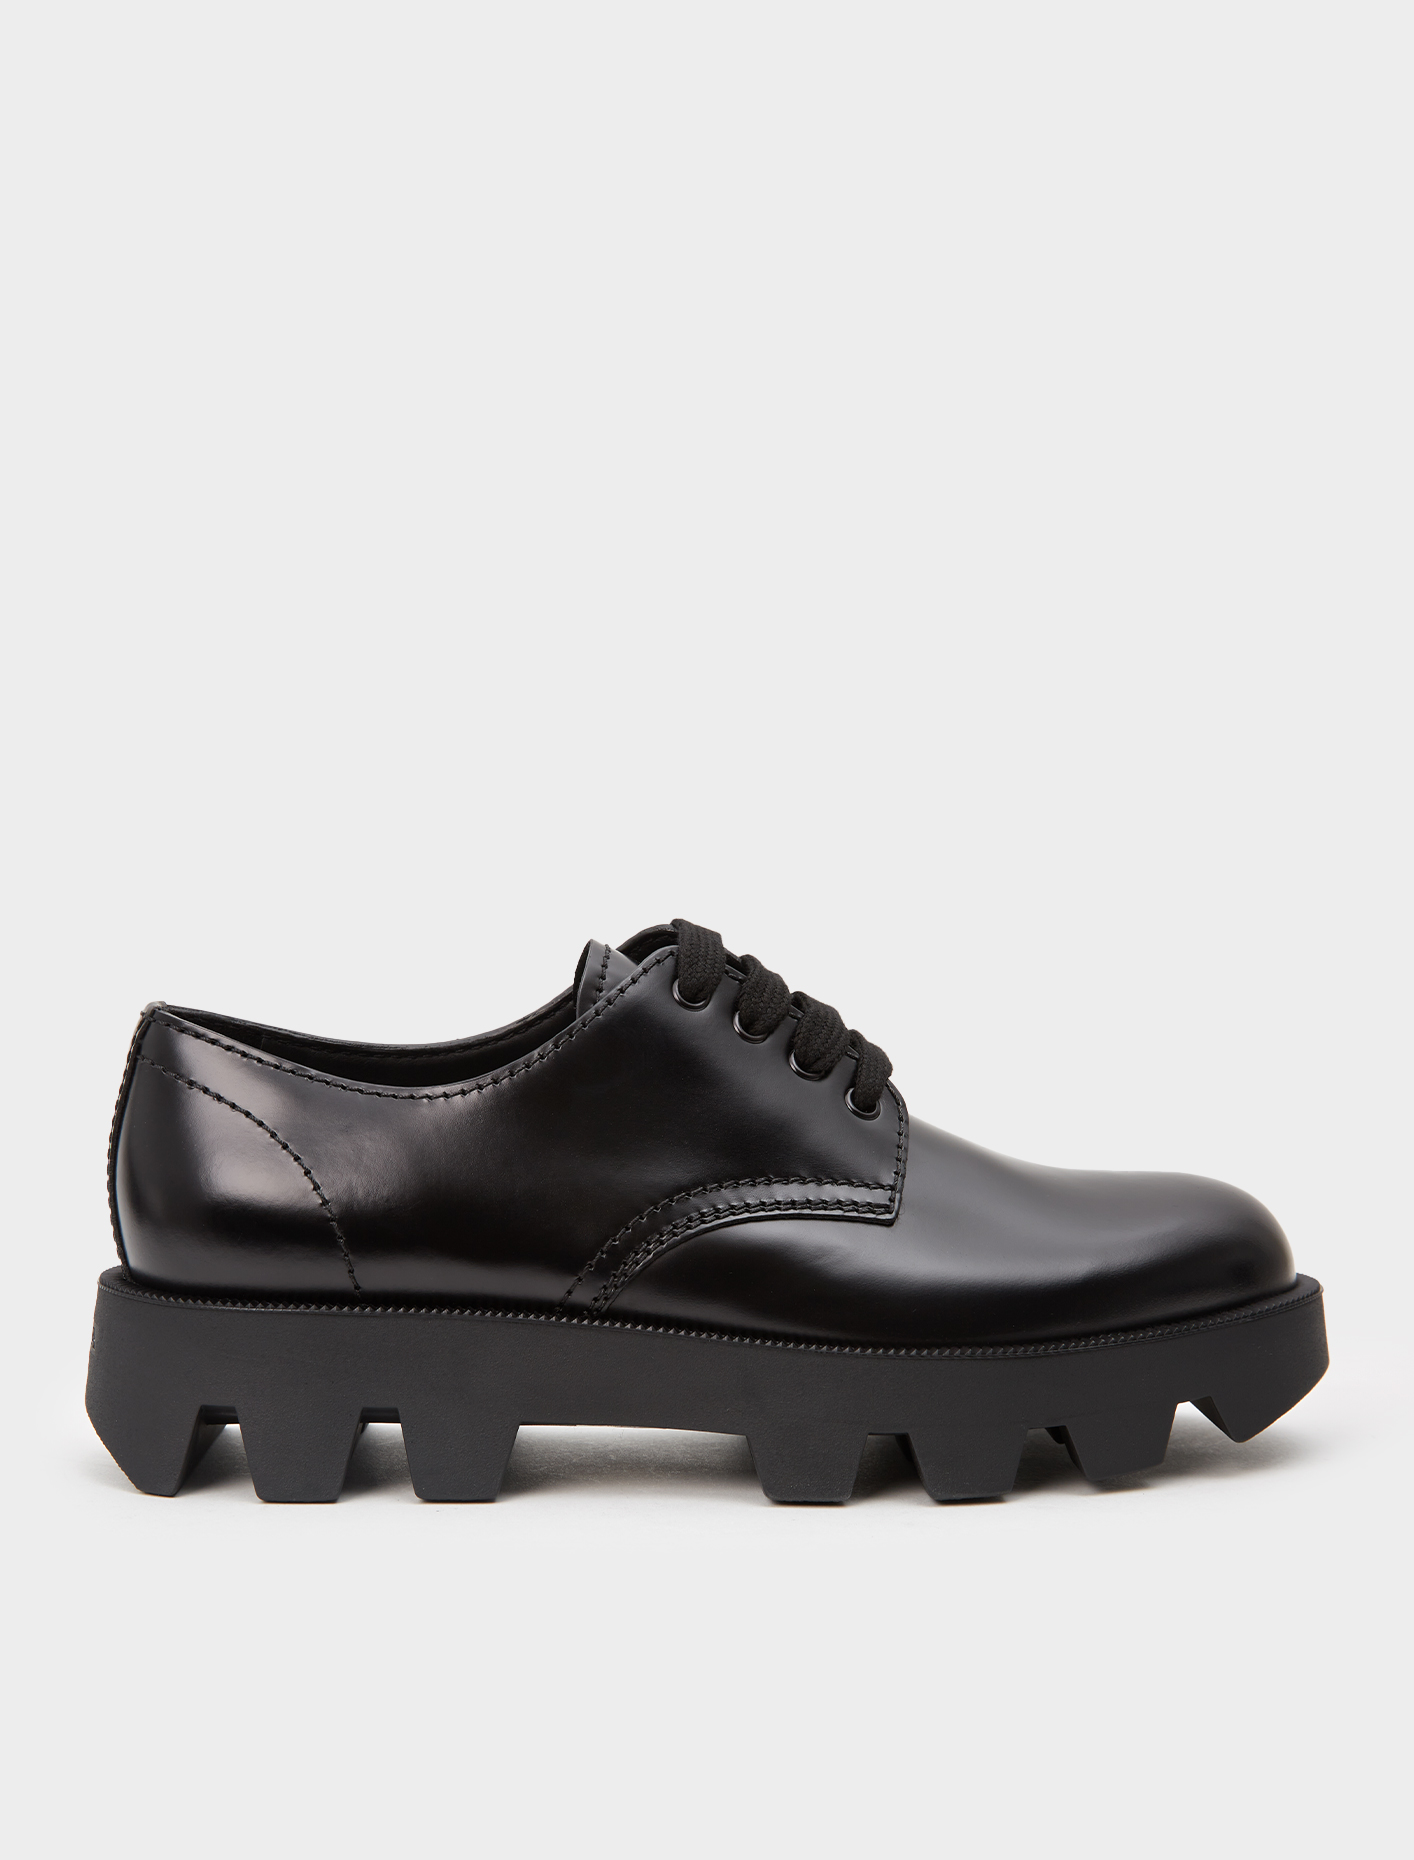 Rocksand Brushed Leather Lace-Up Shoes in Black